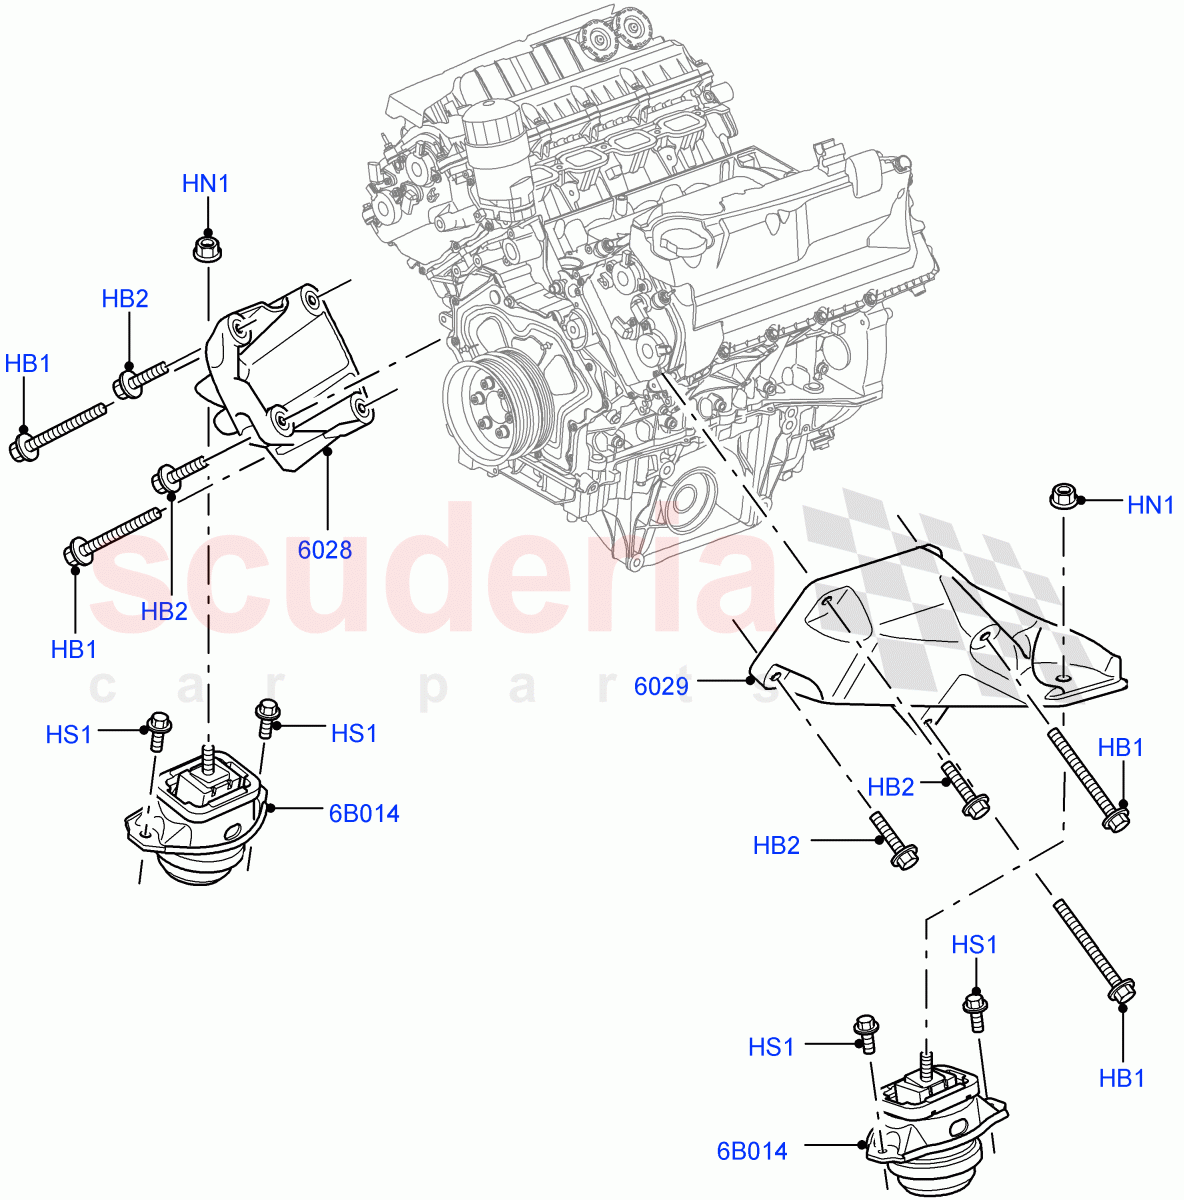 Engine Mounting(5.0L OHC SGDI NA V8 Petrol - AJ133)((V)FROMAA000001) of Land Rover Land Rover Discovery 4 (2010-2016) [4.0 Petrol V6]